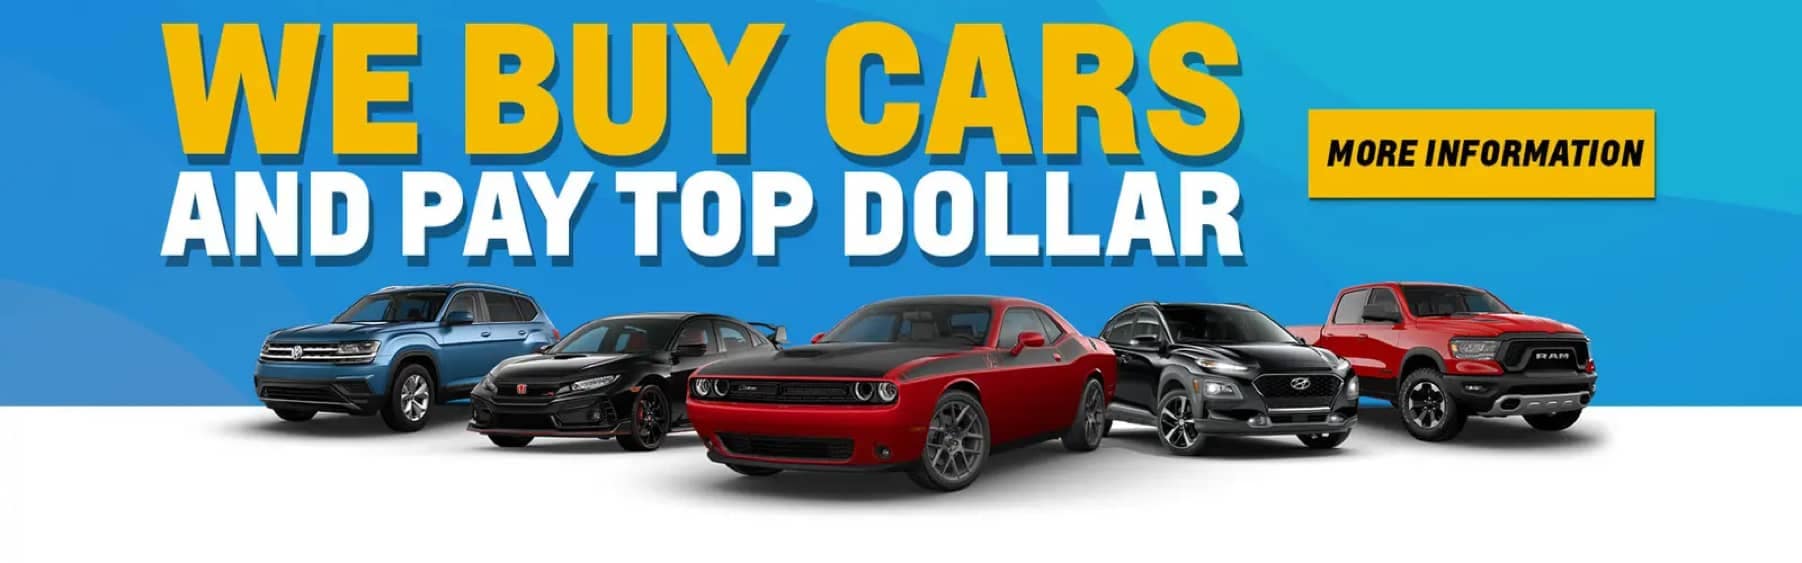 We Buy Cars and Pay Top Dollar